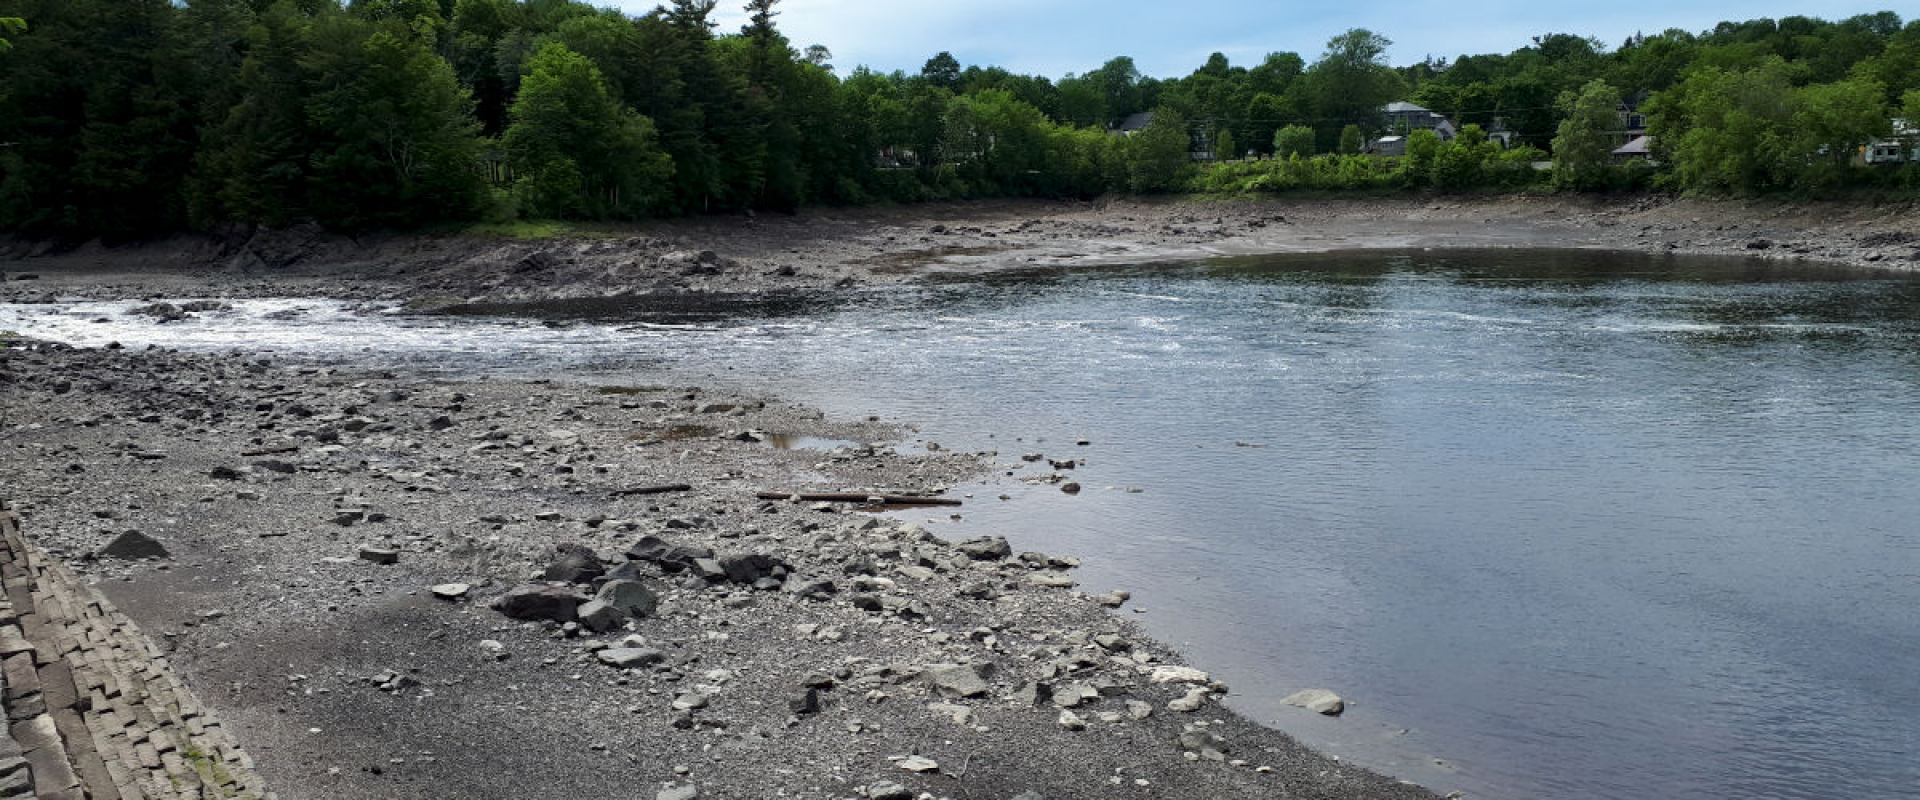 A muddy bank with rocks scattered across it leads into the St. Croix River with green trees on the other side. 